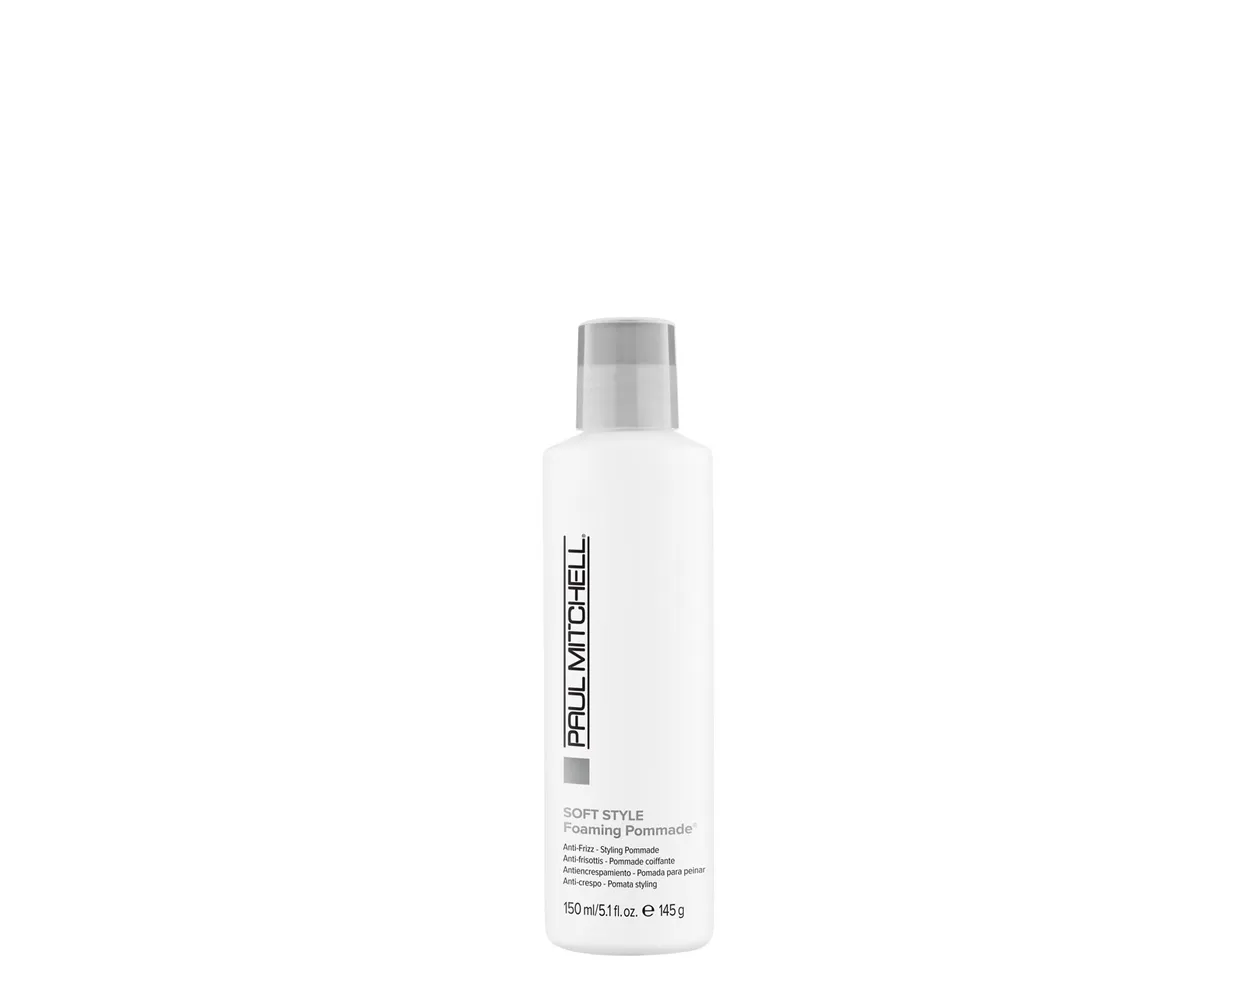 paul-mitchell-soft-style-foaming-pommade-5_1-oz__41146